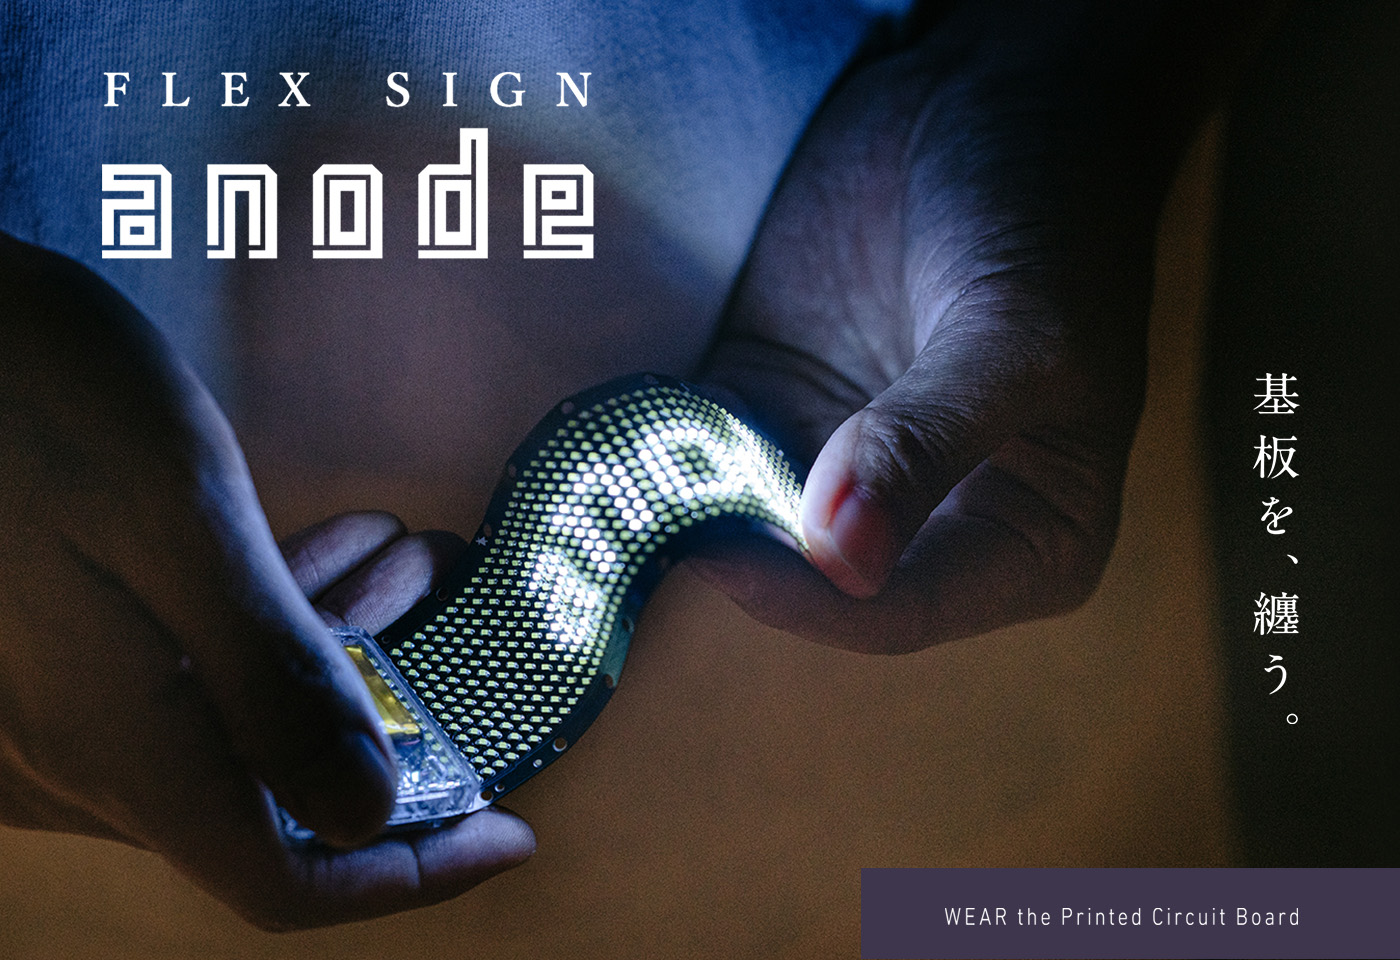 FLEX SIGN anode 基板を纏う WEAR the Printed Circuit Board